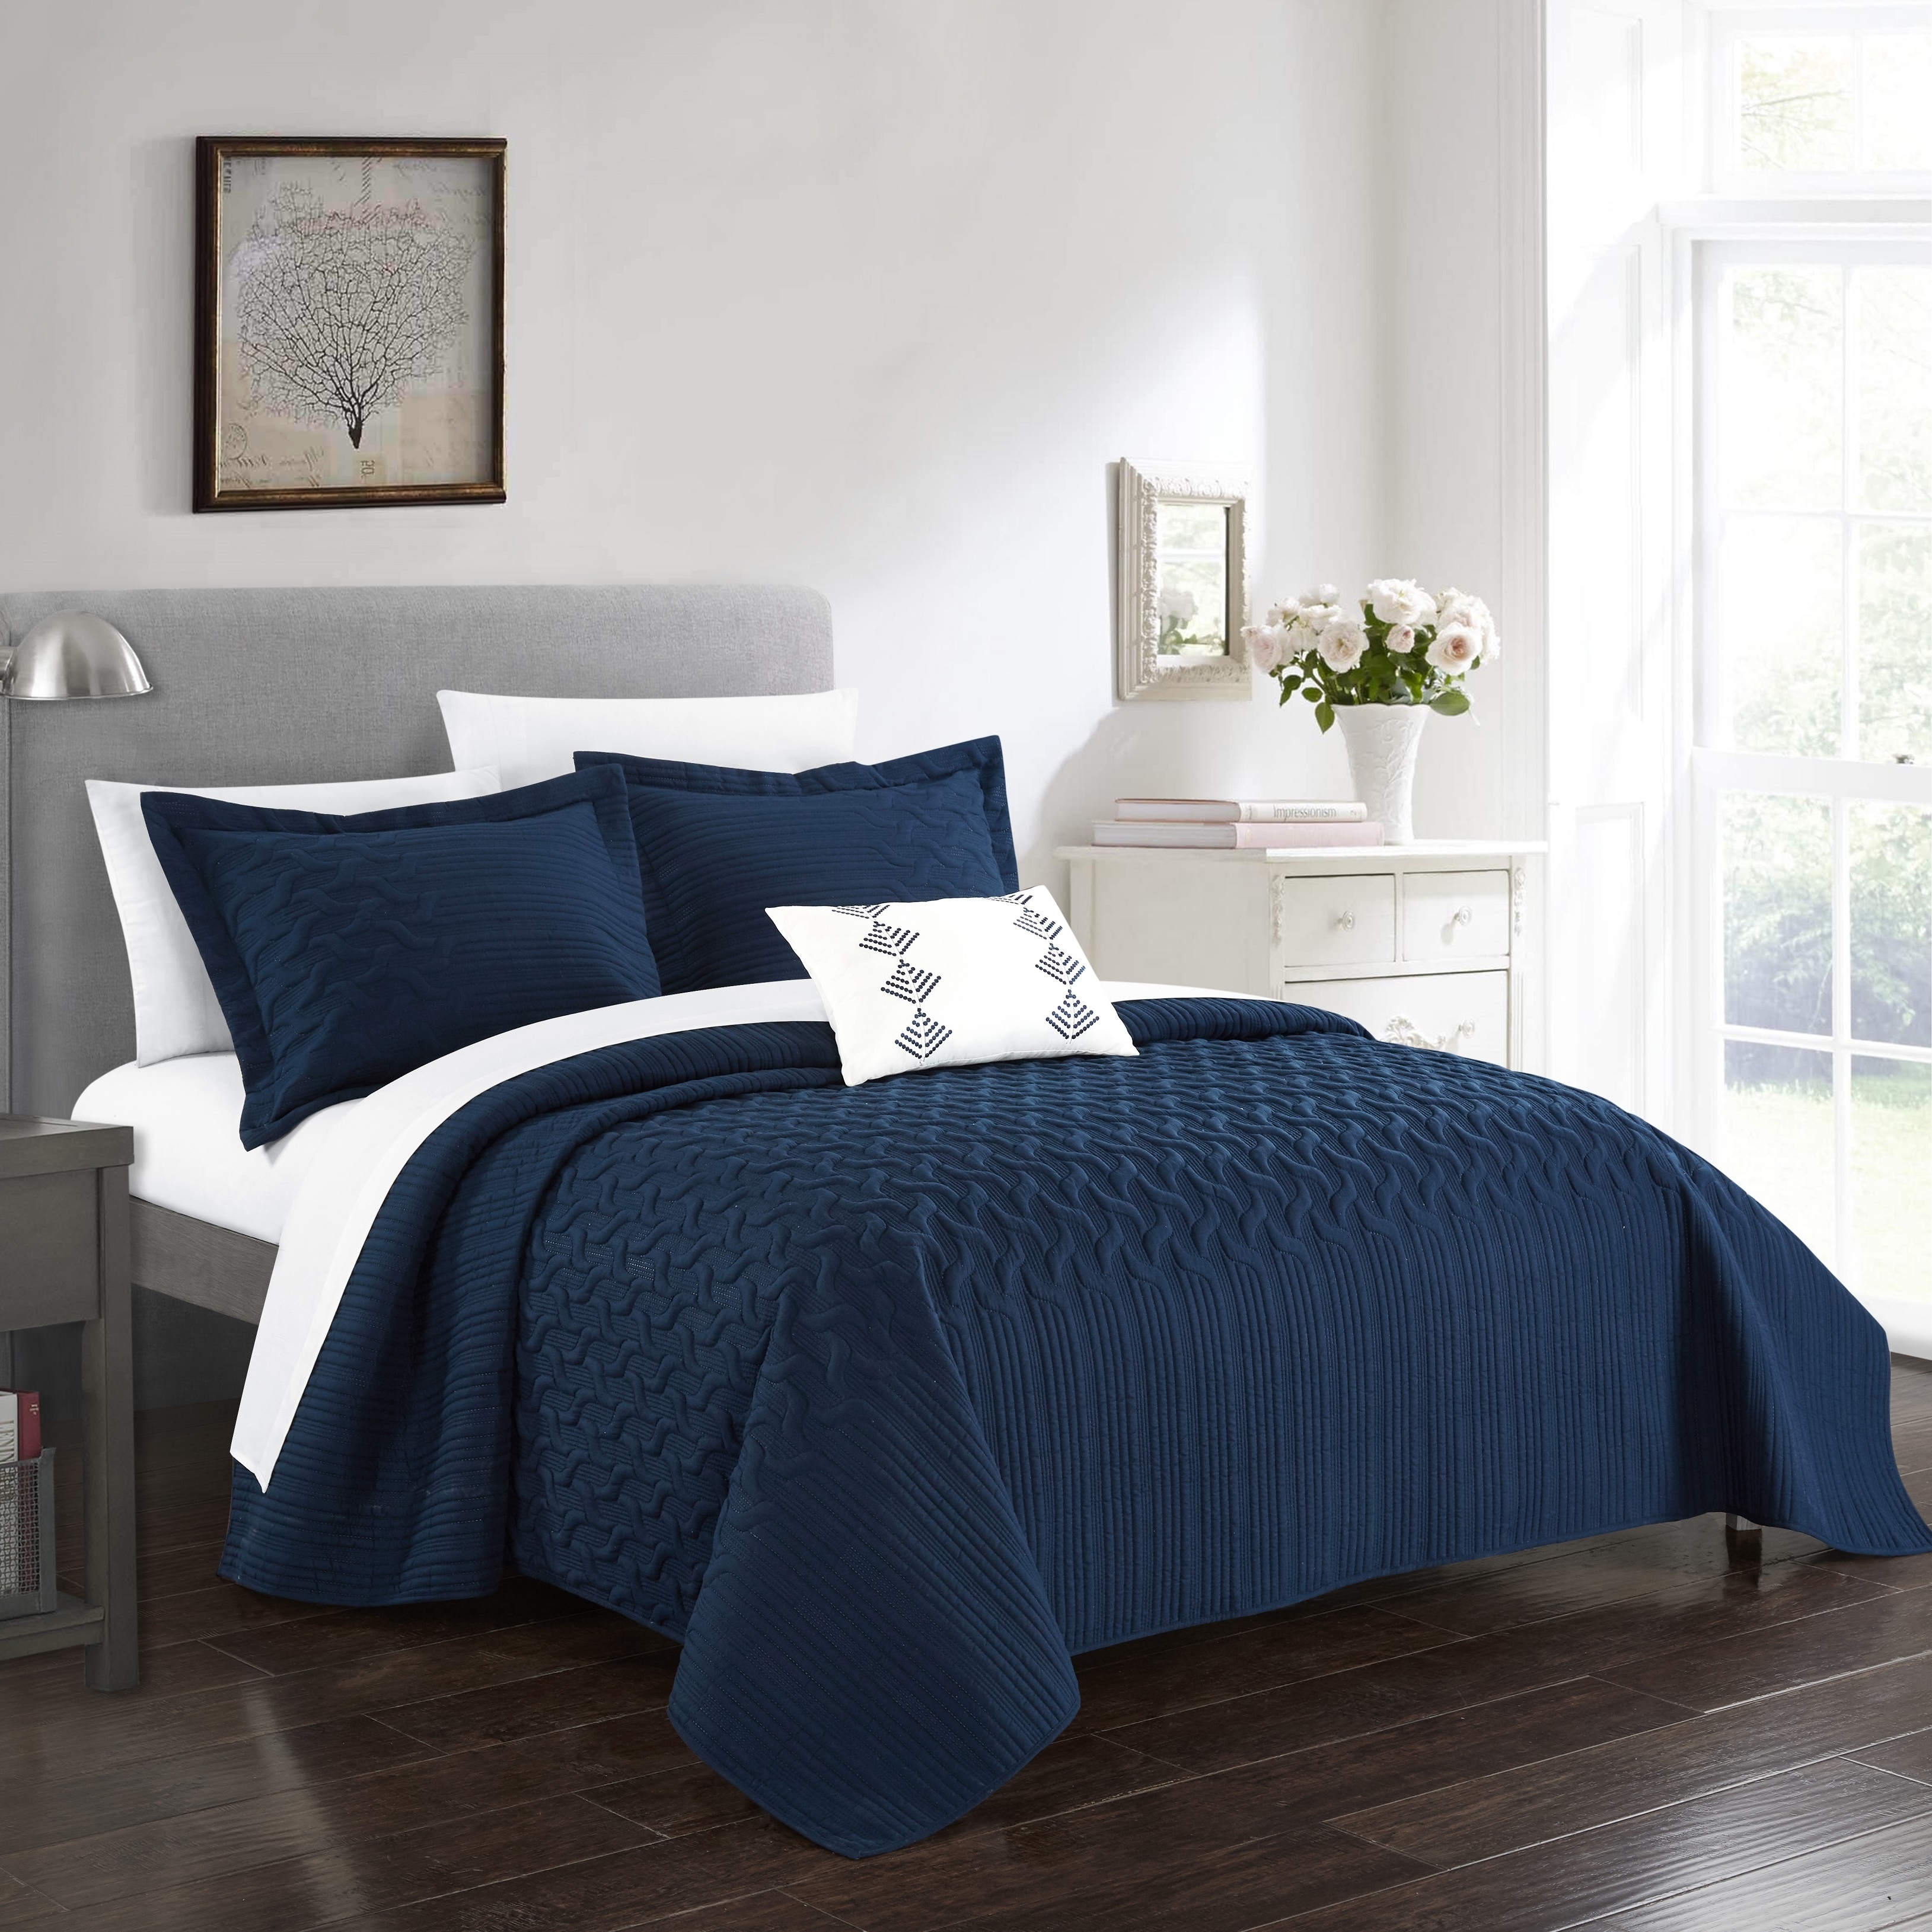 Shaliya 4 Or 3 Piece Quilt Cover Set Interlaced Vine Pattern Quilted Bed In A Bag - Navy, Queen